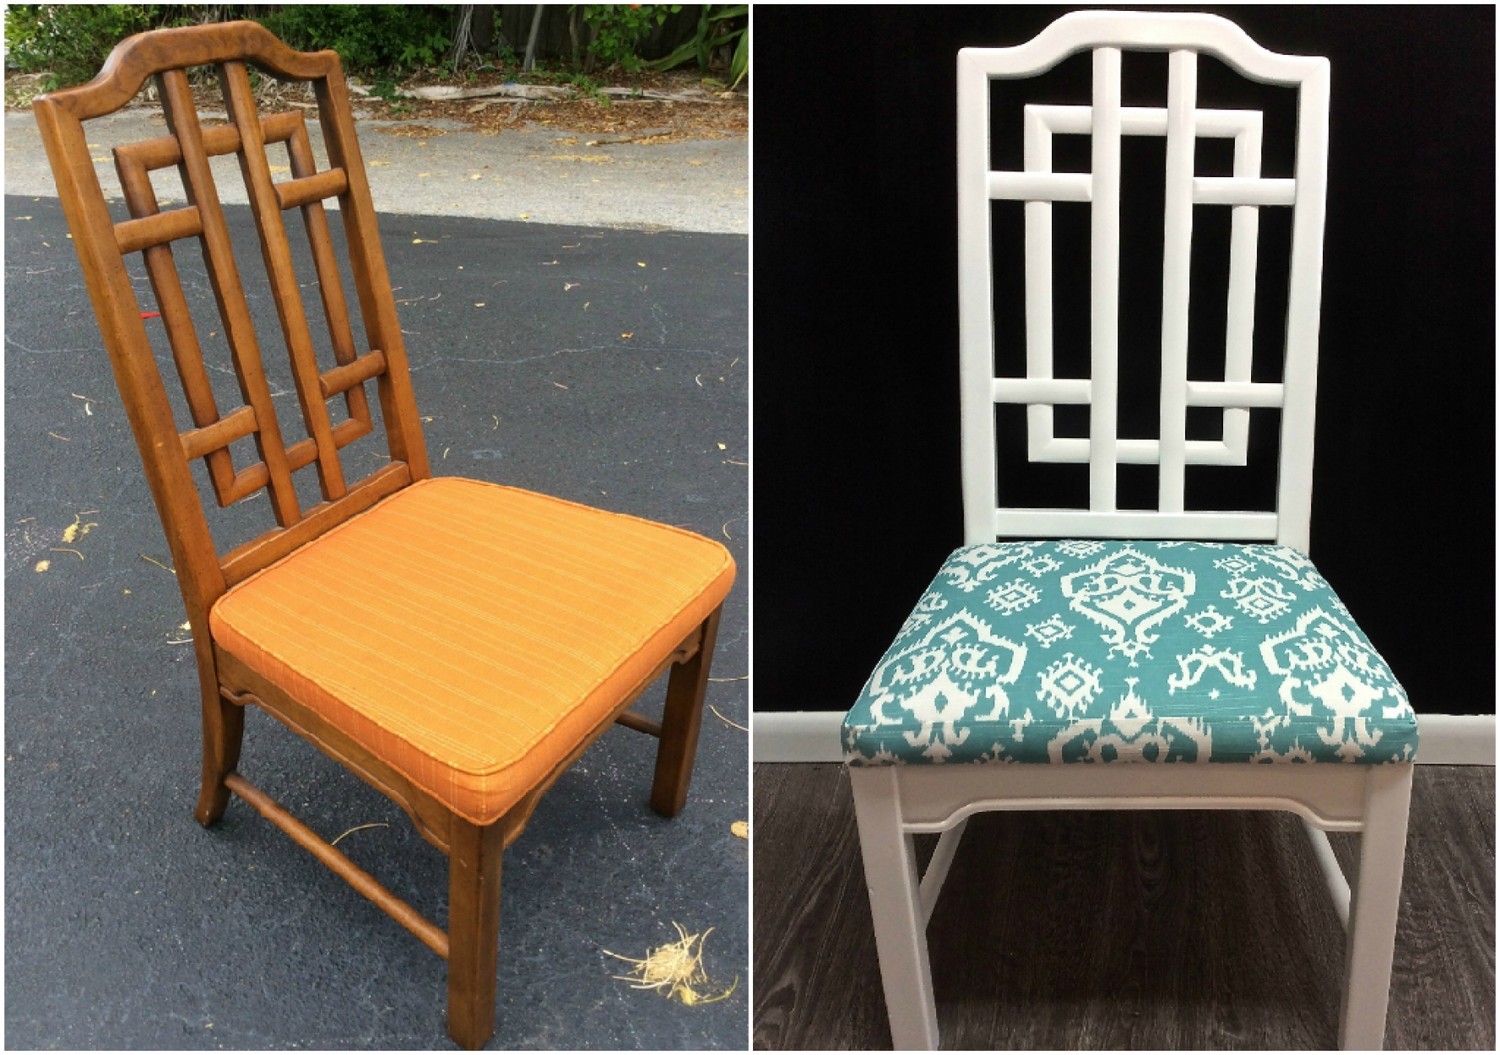 How to Reupholster a Chair and Make It Look Brand New | Martha Stewart